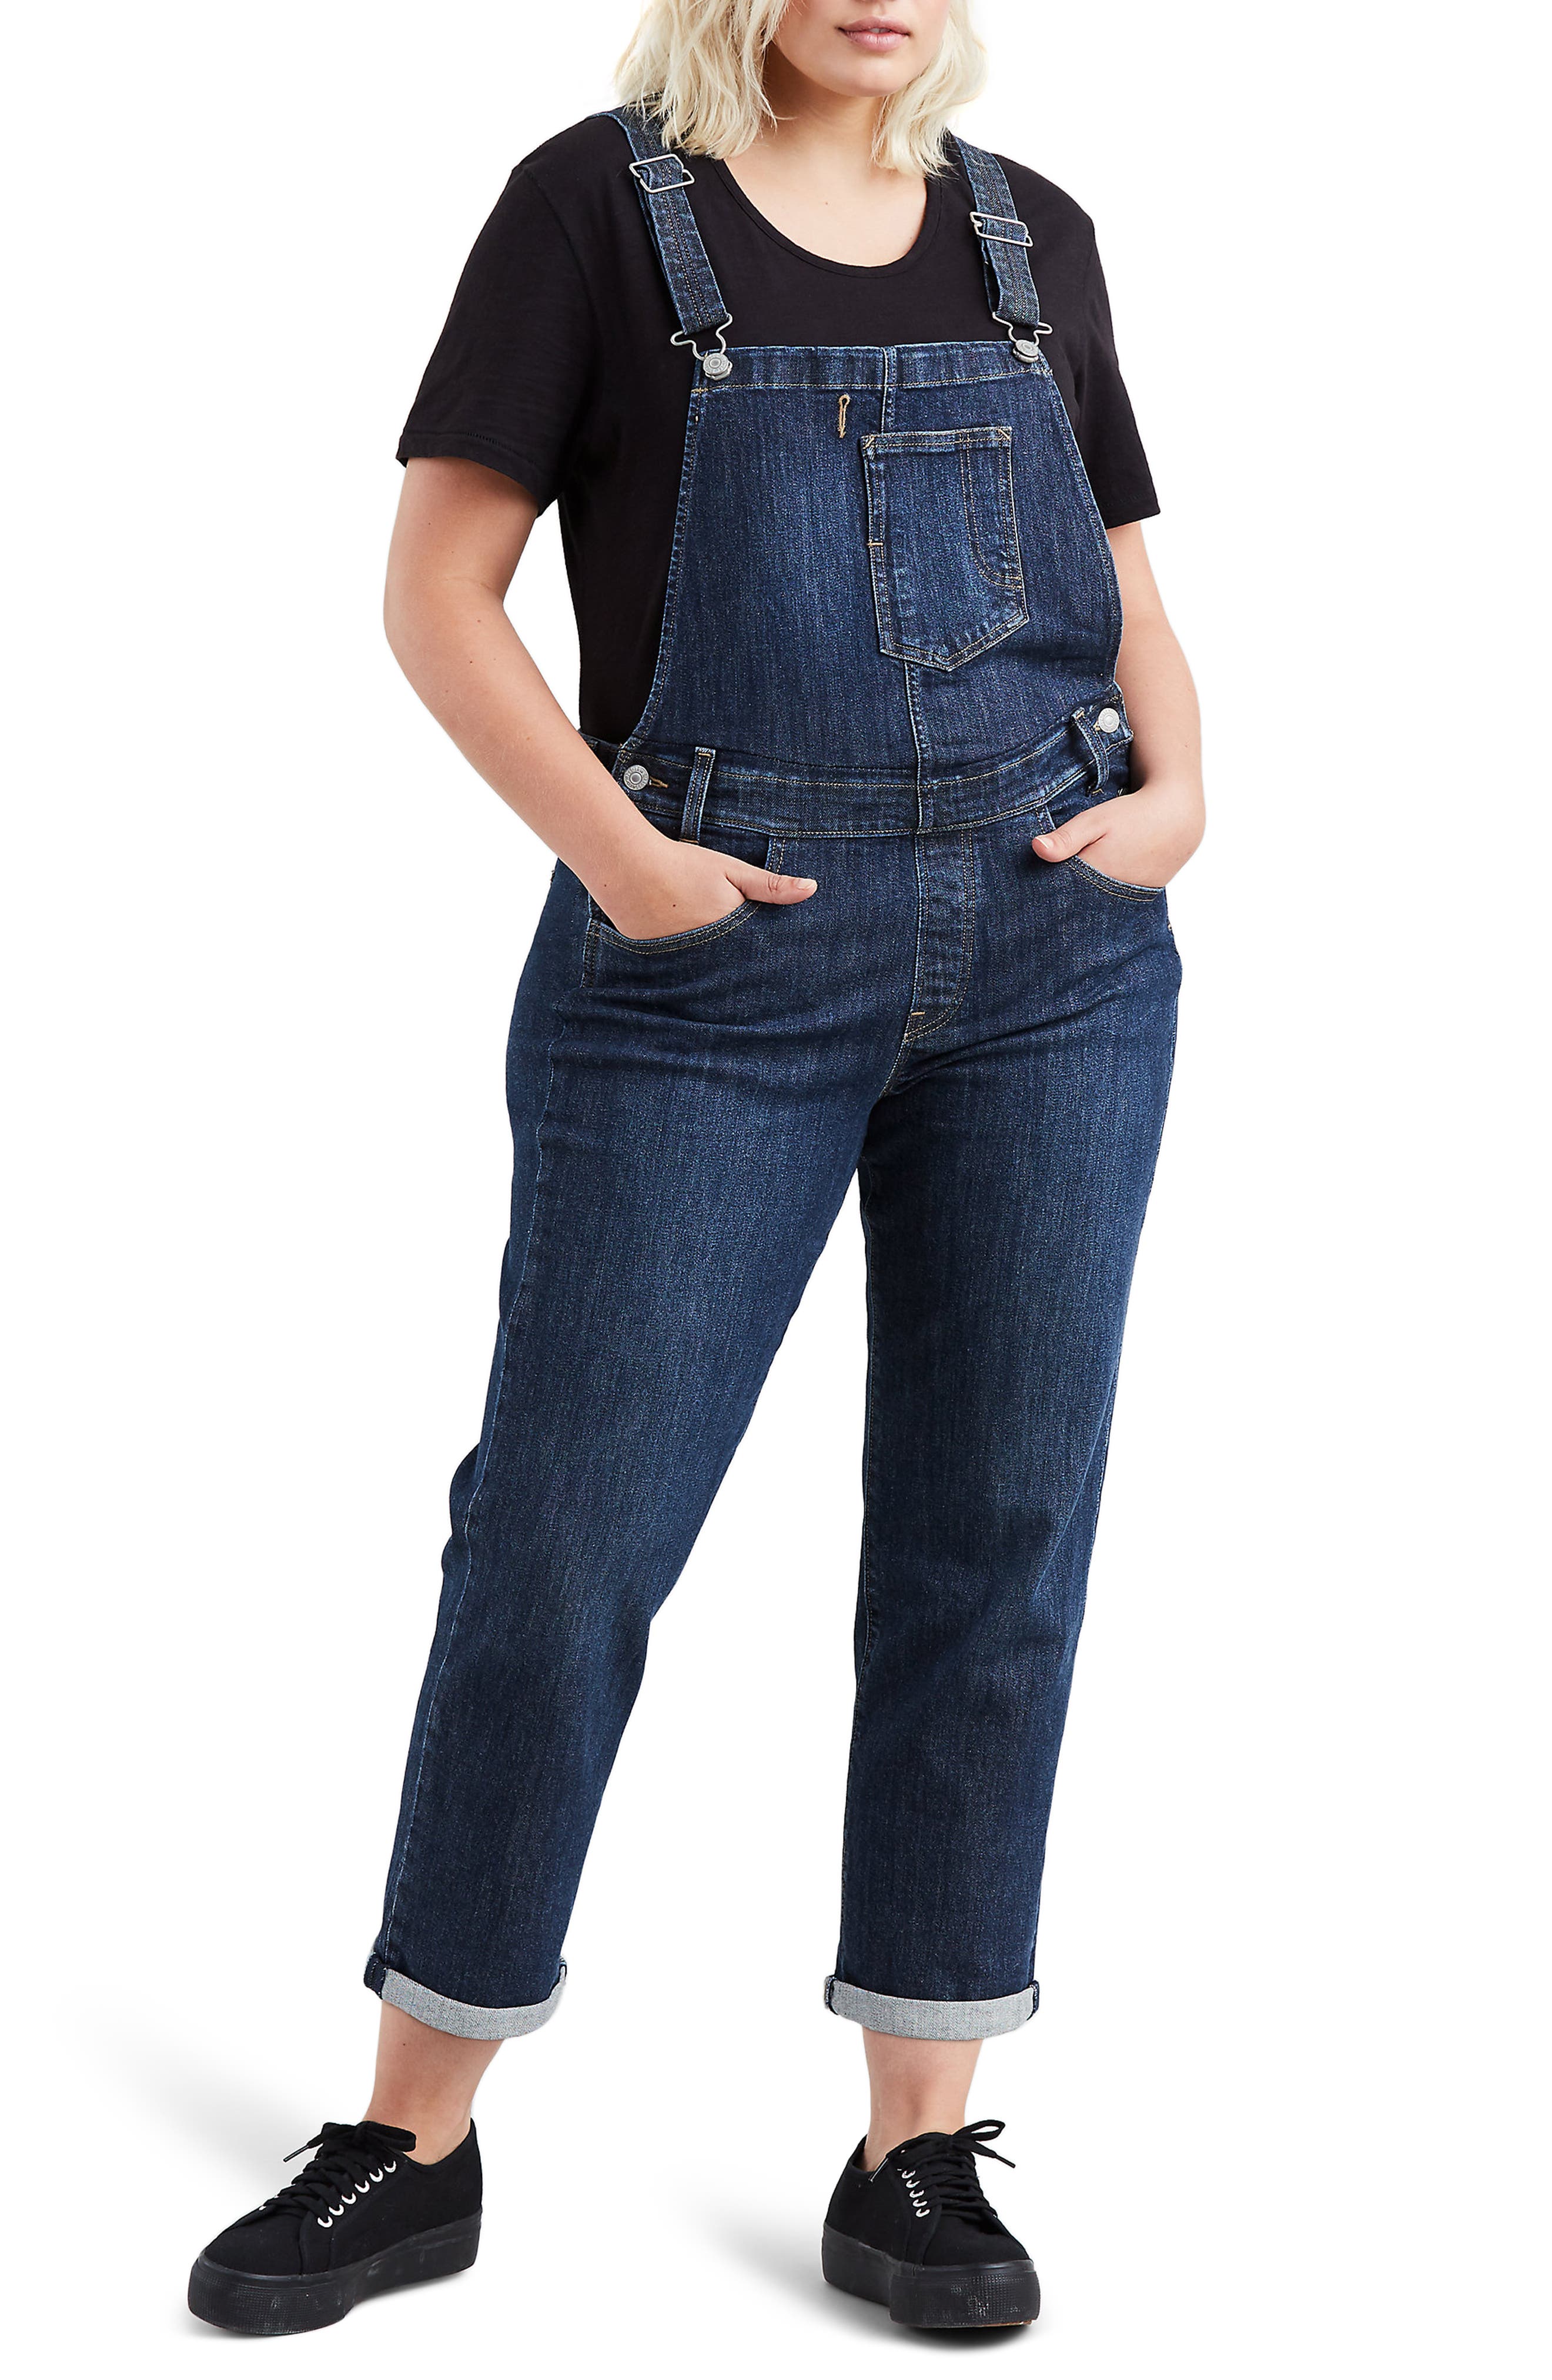 levis jeans overall